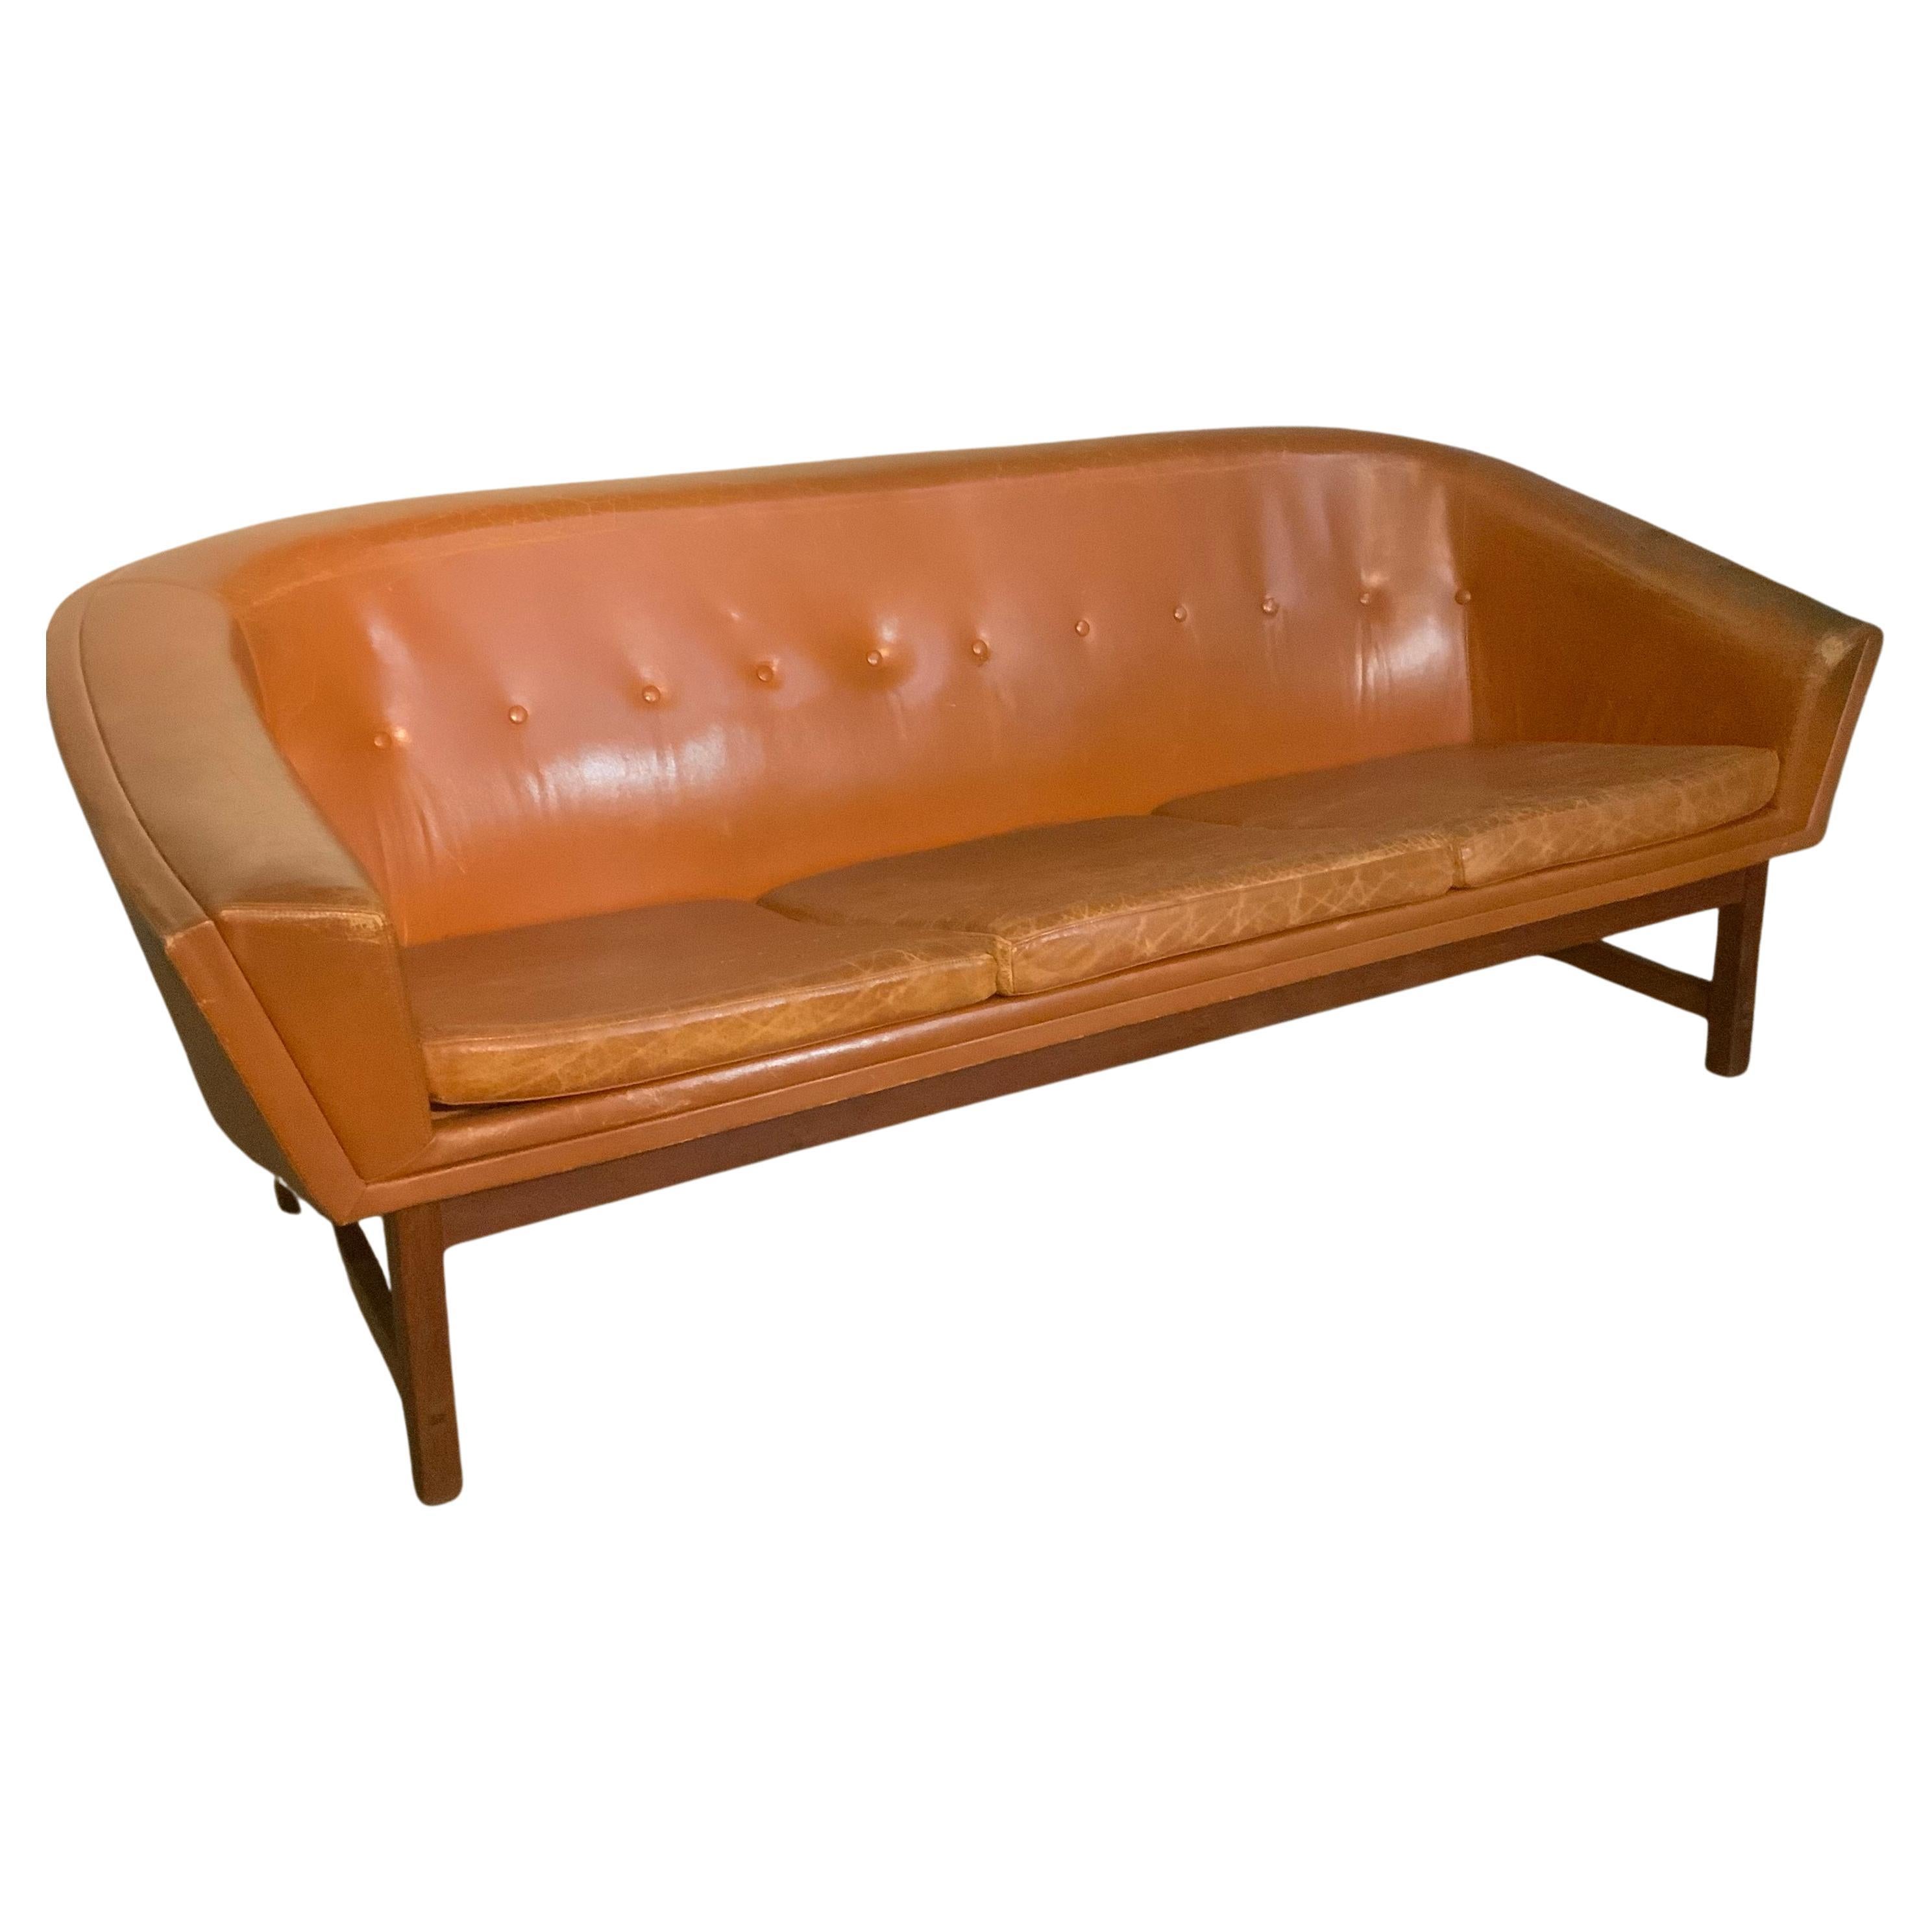 Lennart Bender "Corona" Leather Couch Sweden 1960 For Sale